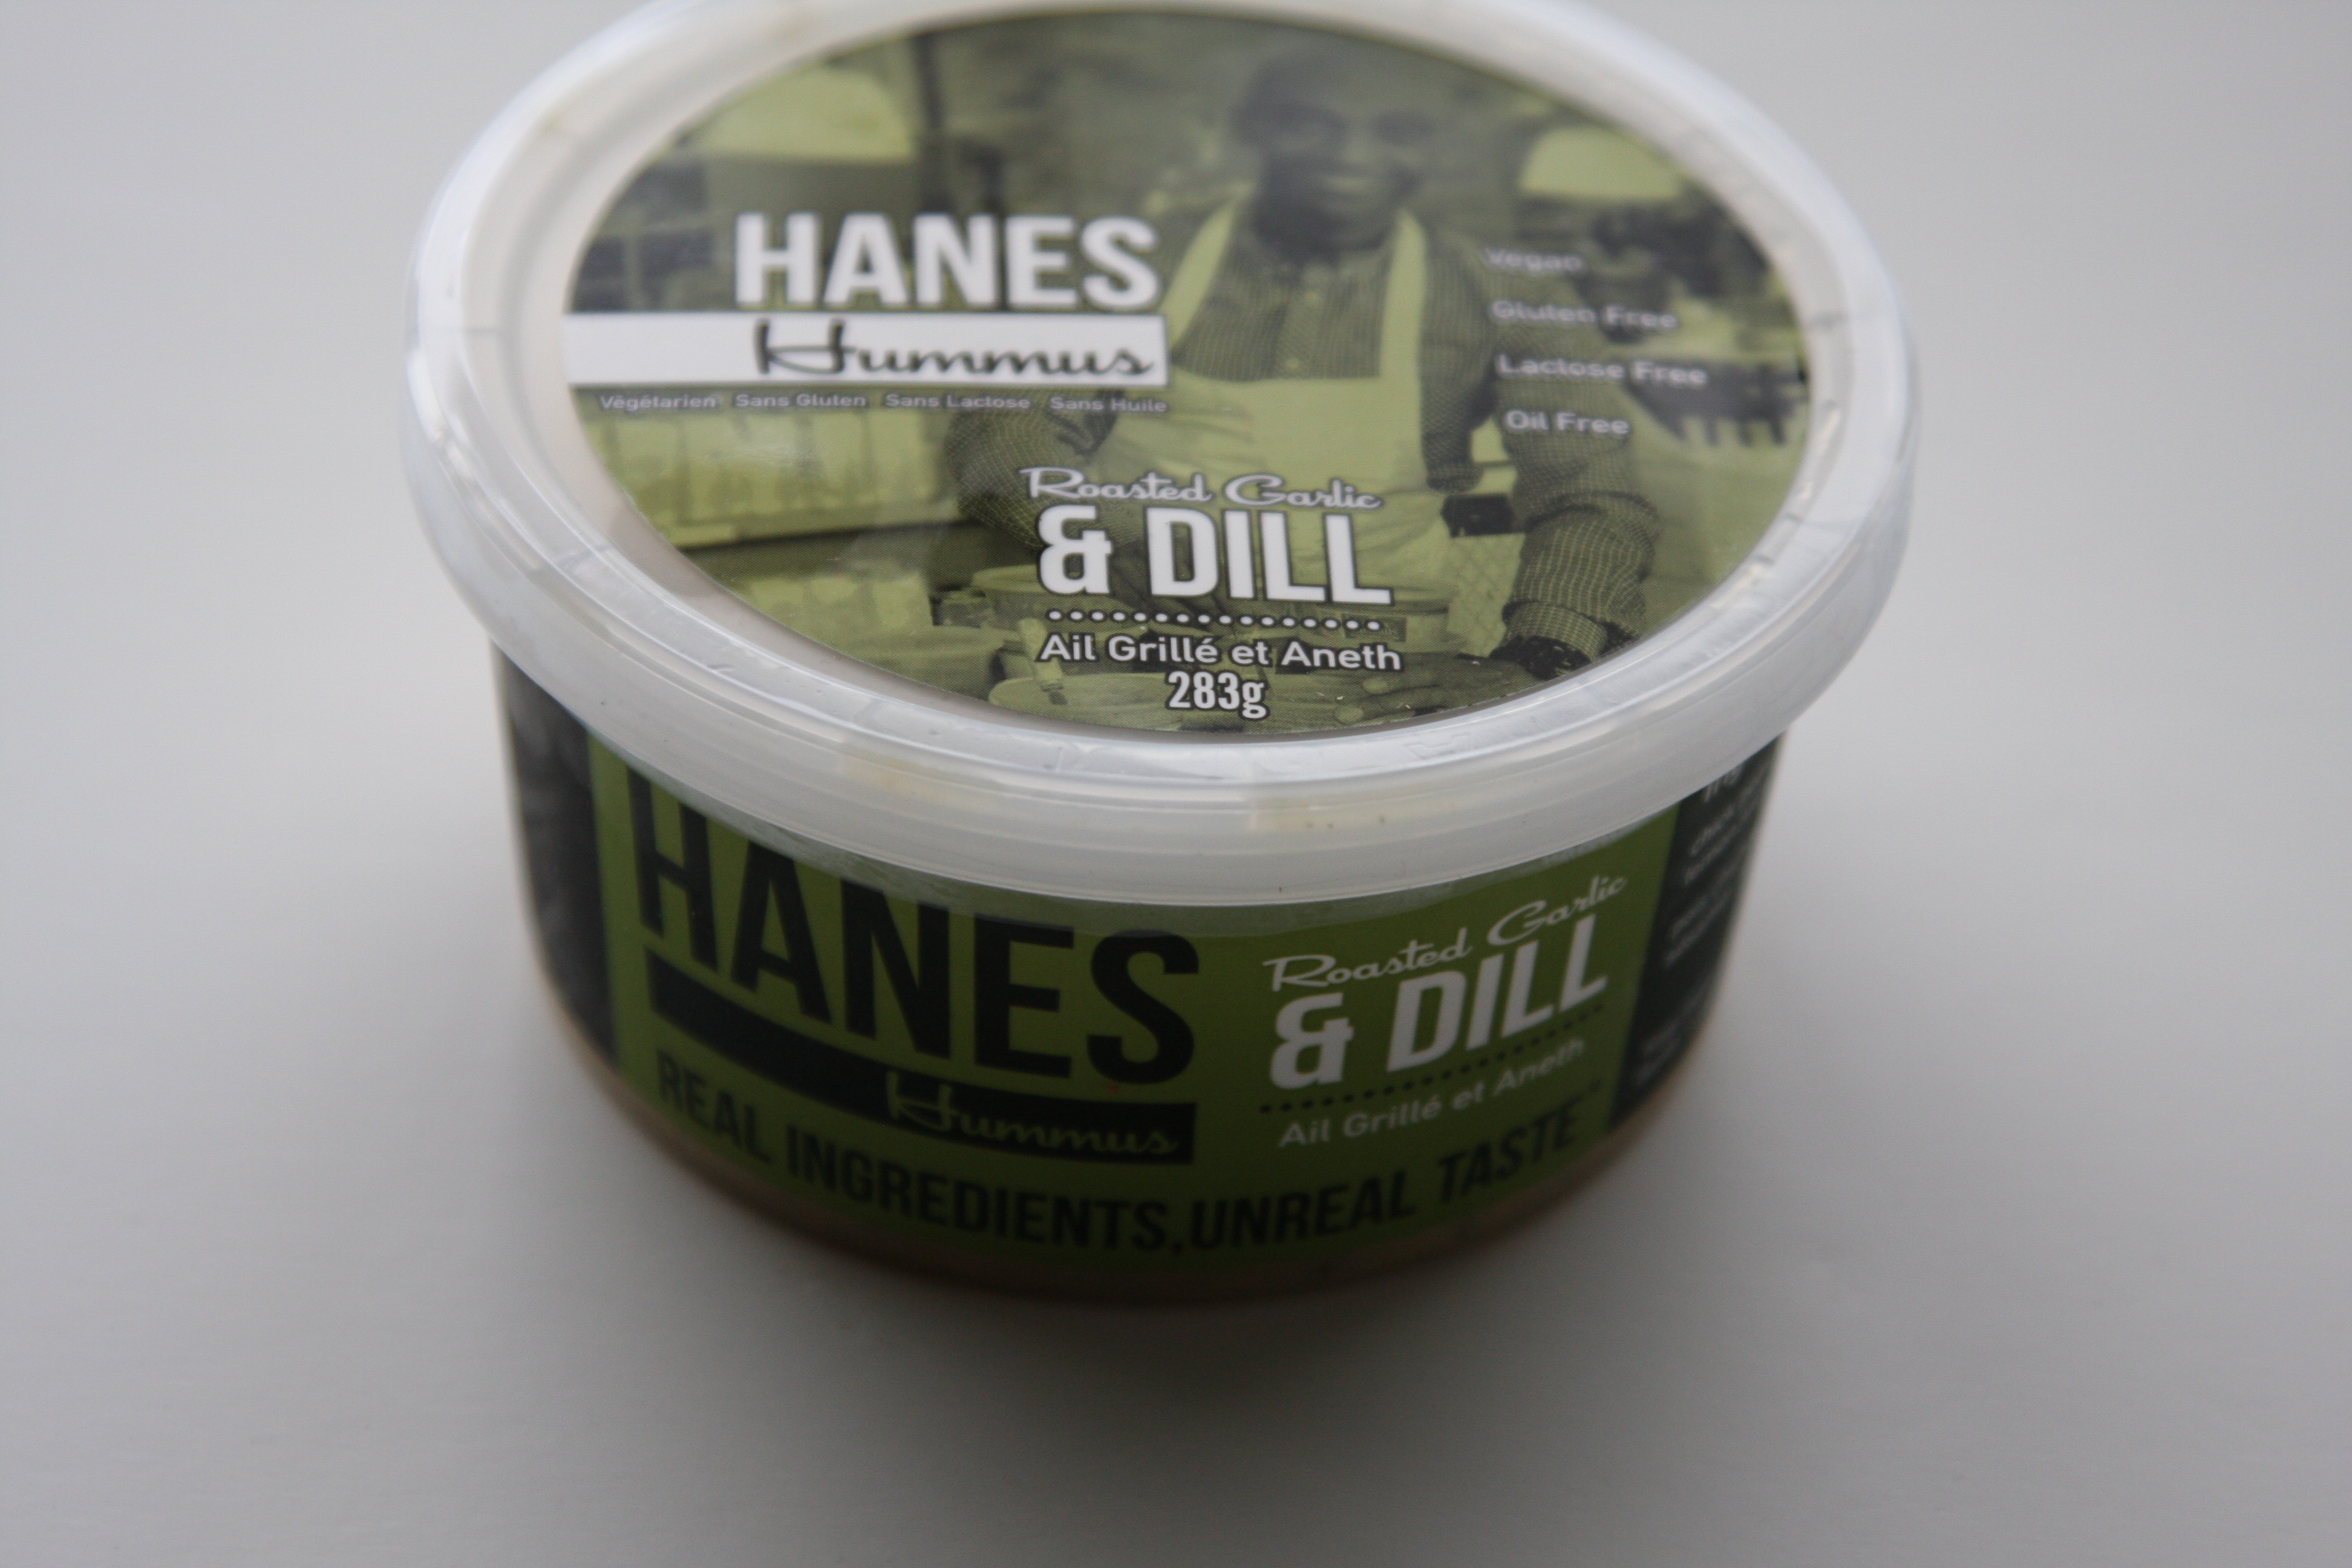 Hanes Hummus roasted garlic & dill container from side